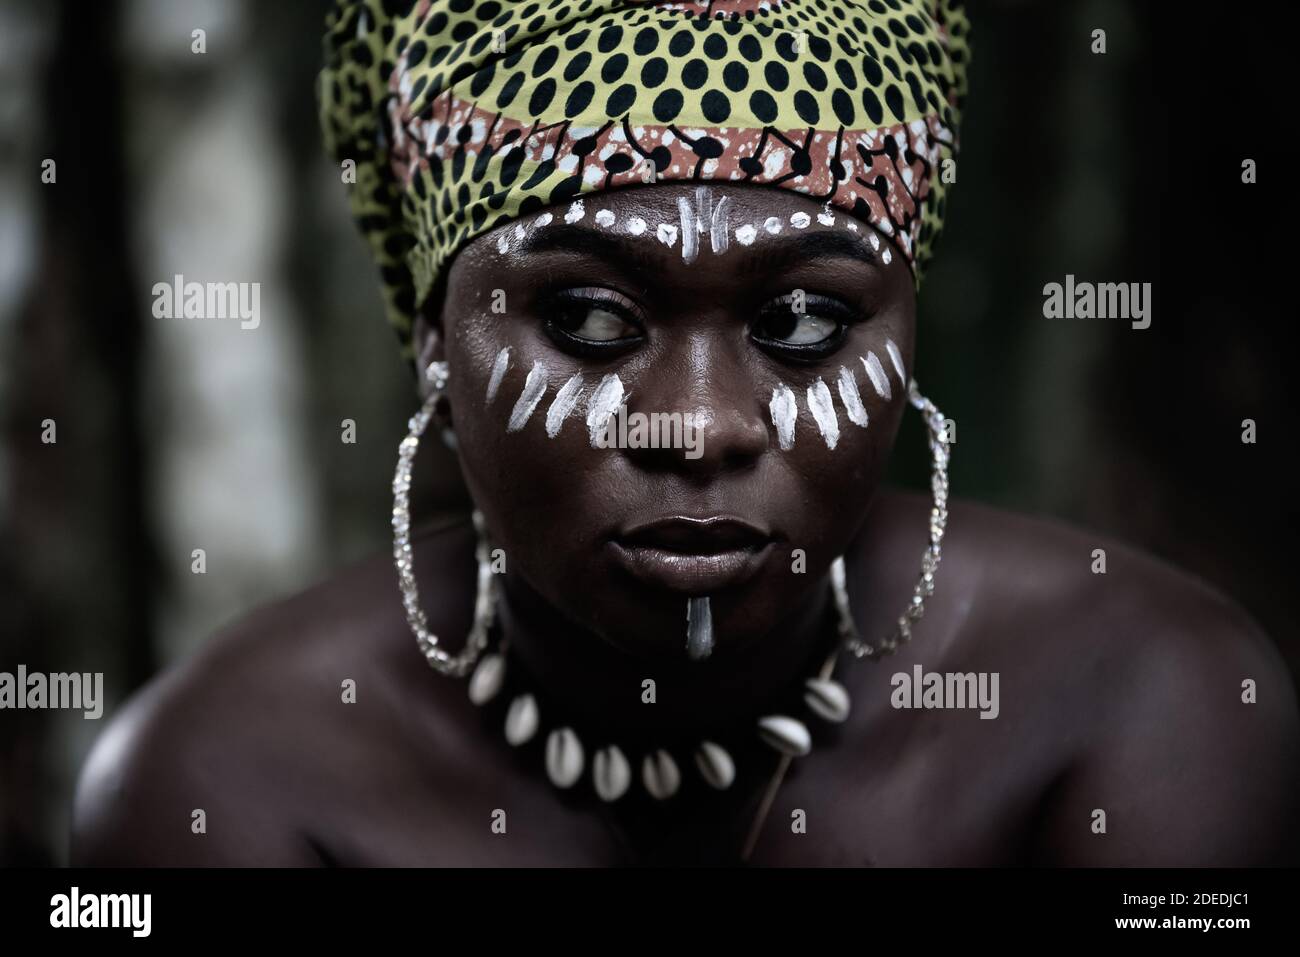 African woman sitting in the Aburi forest in Ghana with white painting on her face and headdress Stock Photo